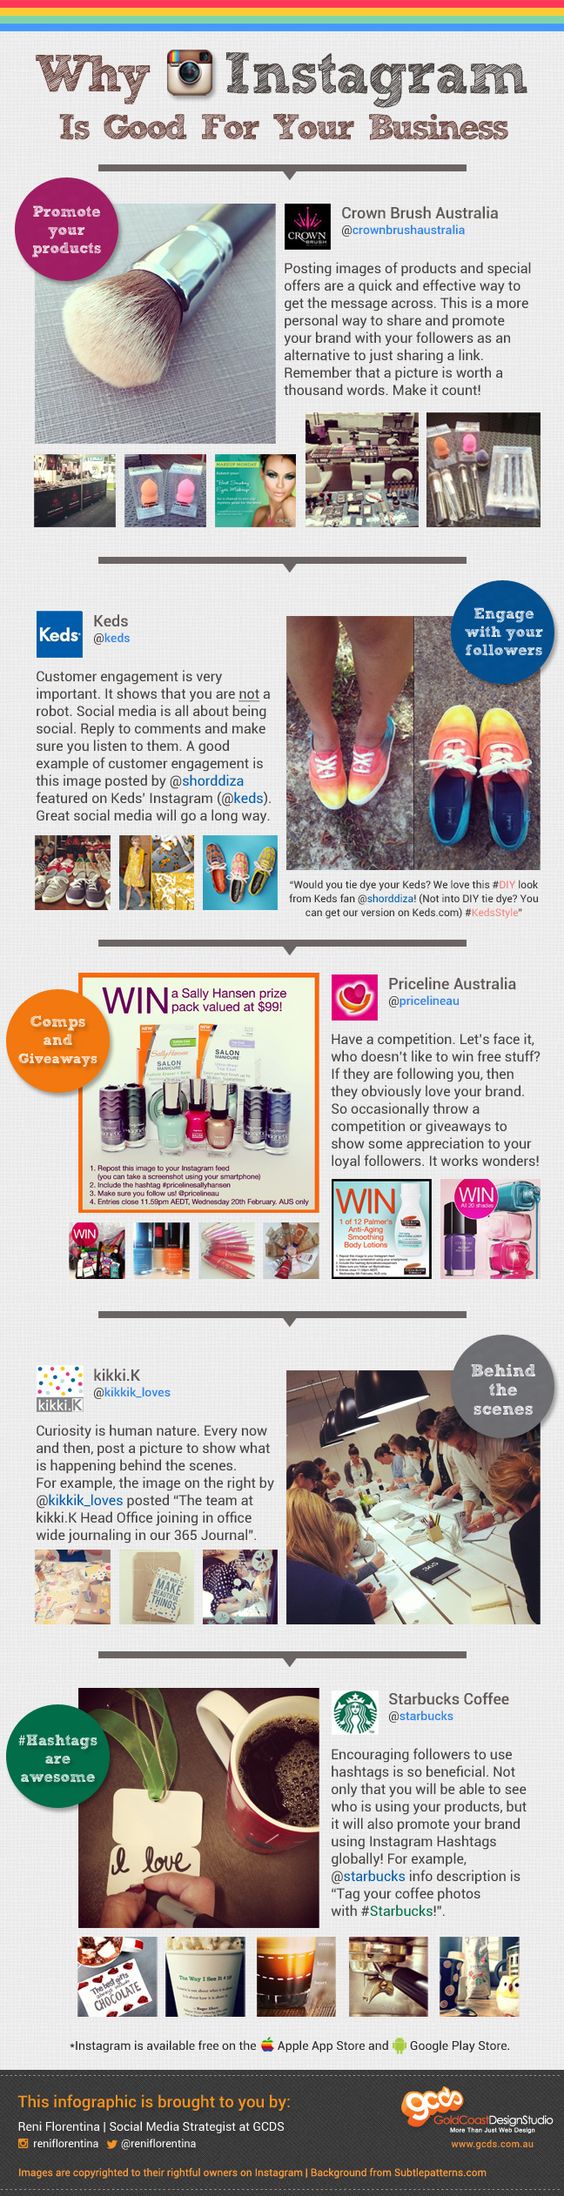 How Businesses Can Use #Instagram [#INFOGRAPHIC] #SocialMedia